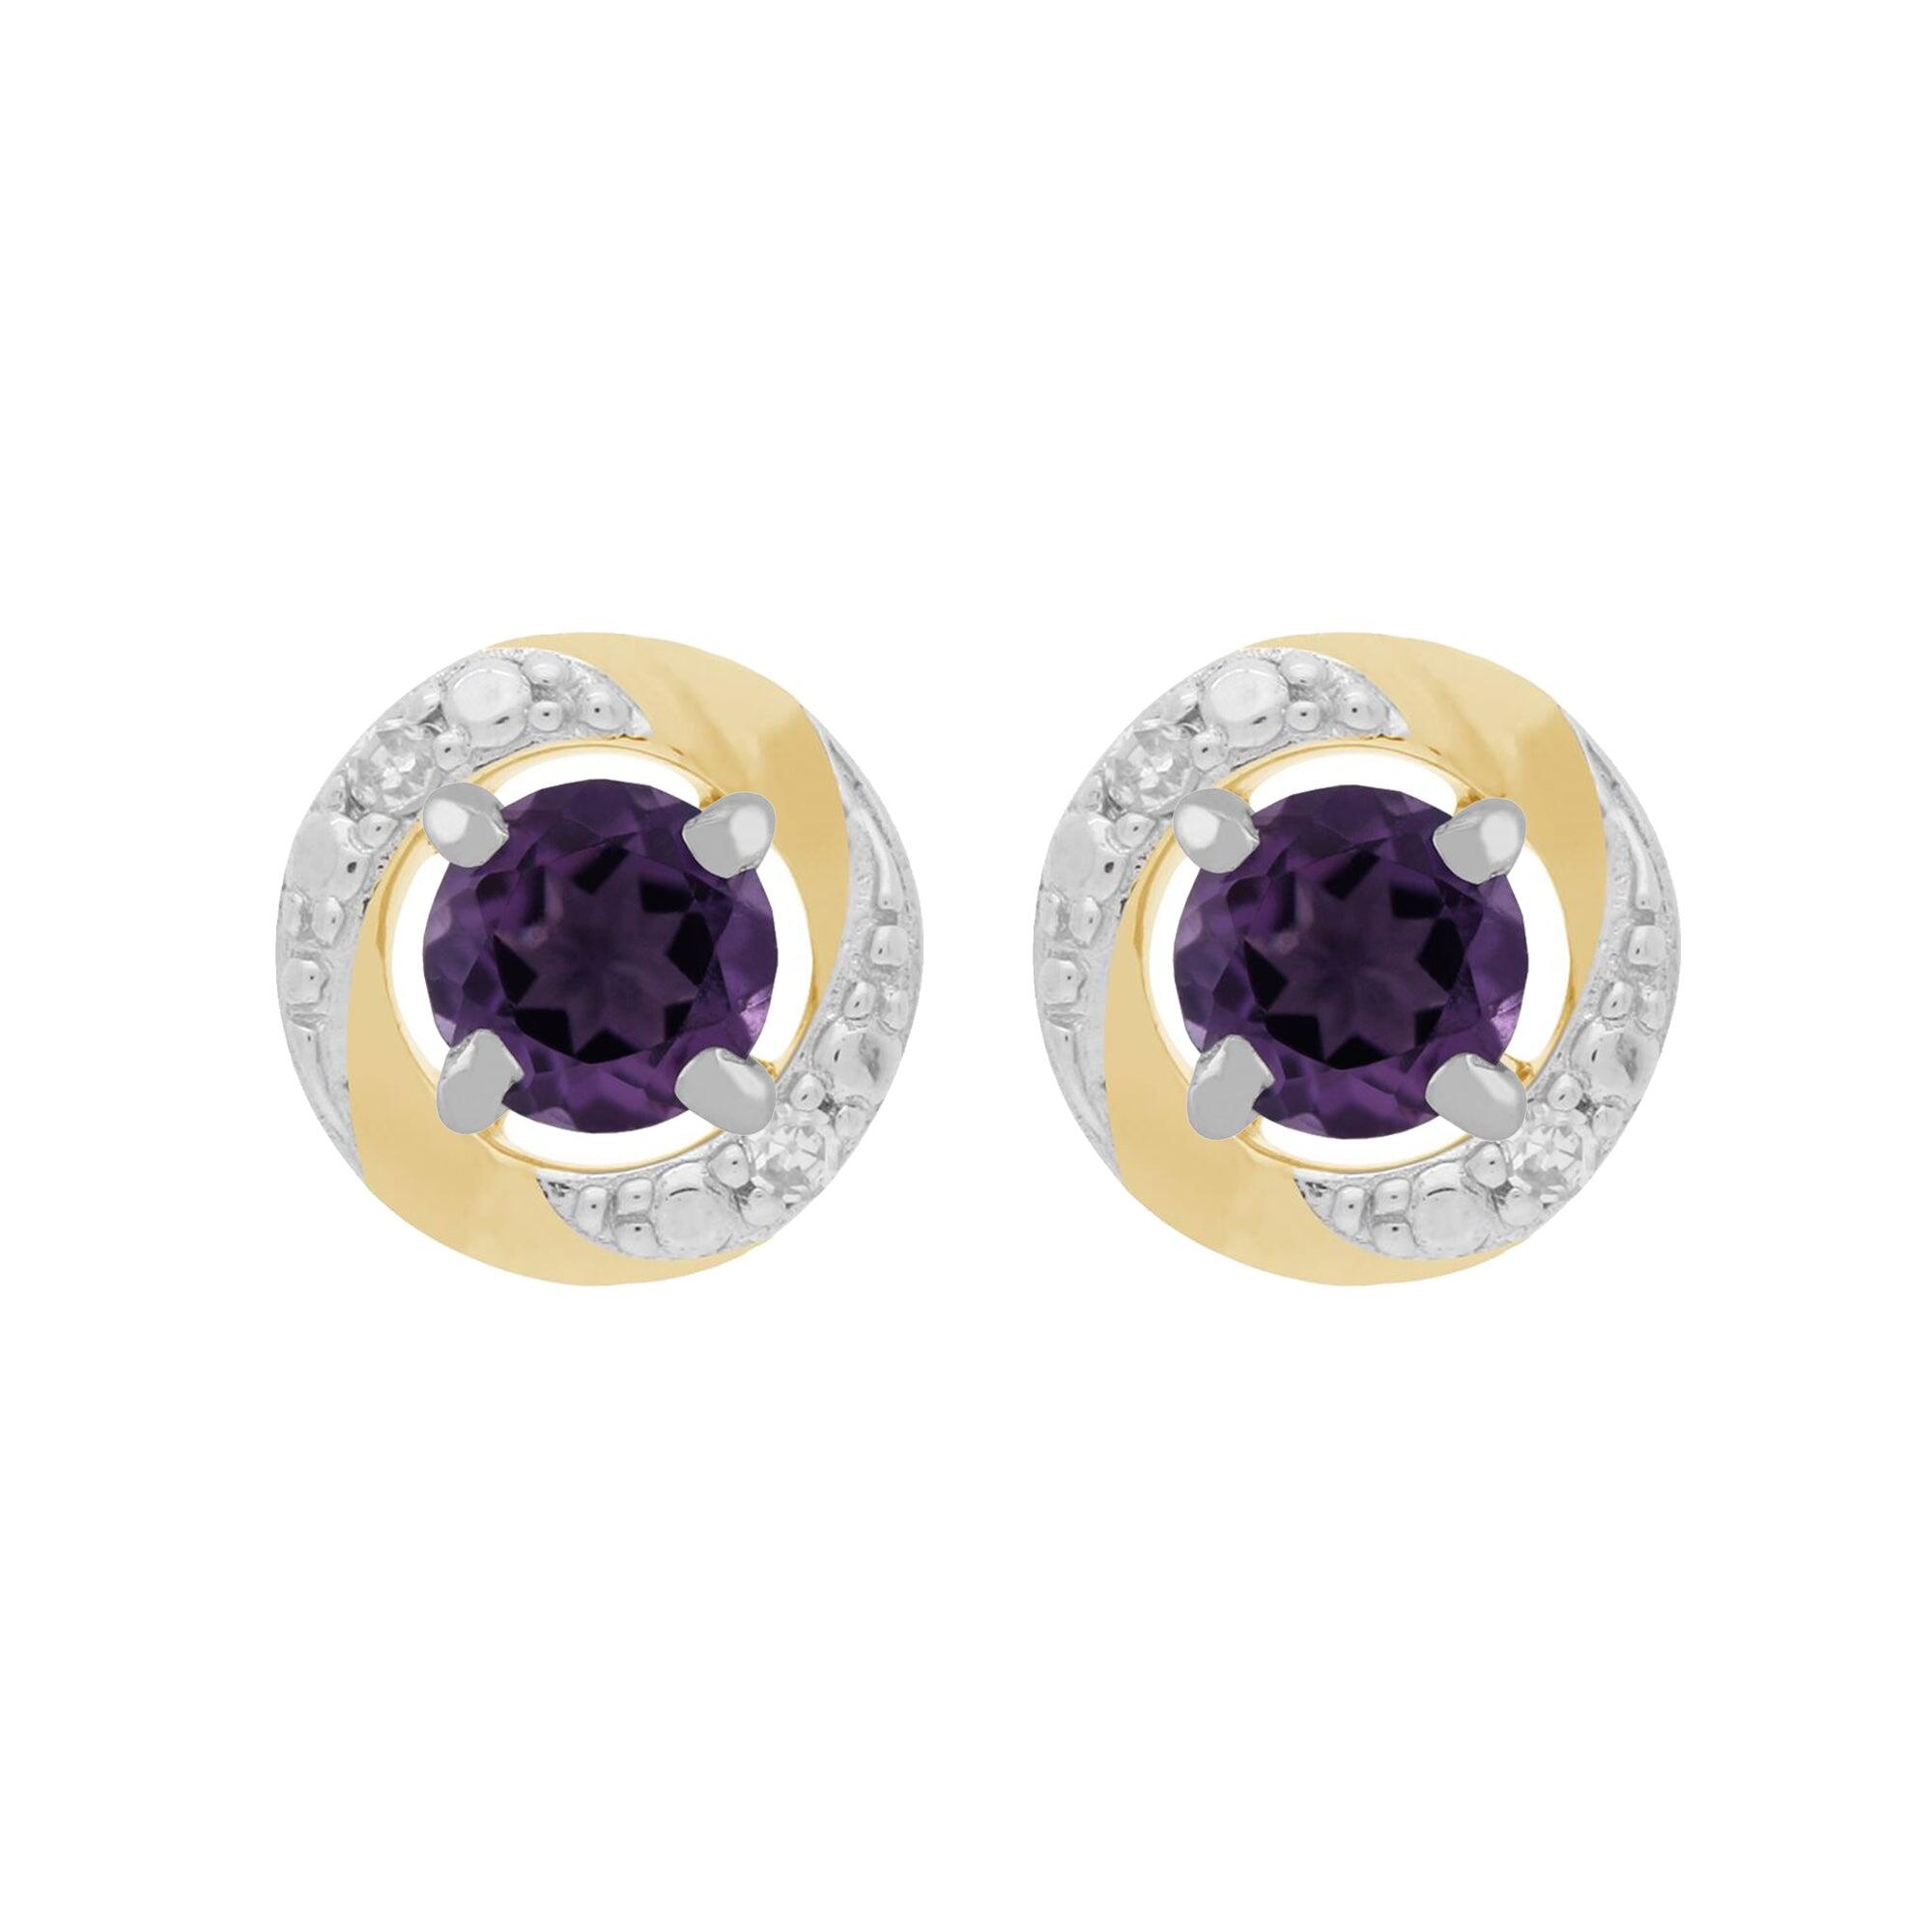 9ct White Gold Amethyst Stud Earrings with Detachable Diamond Halo Ear Jacket in 9ct Yellow Gold